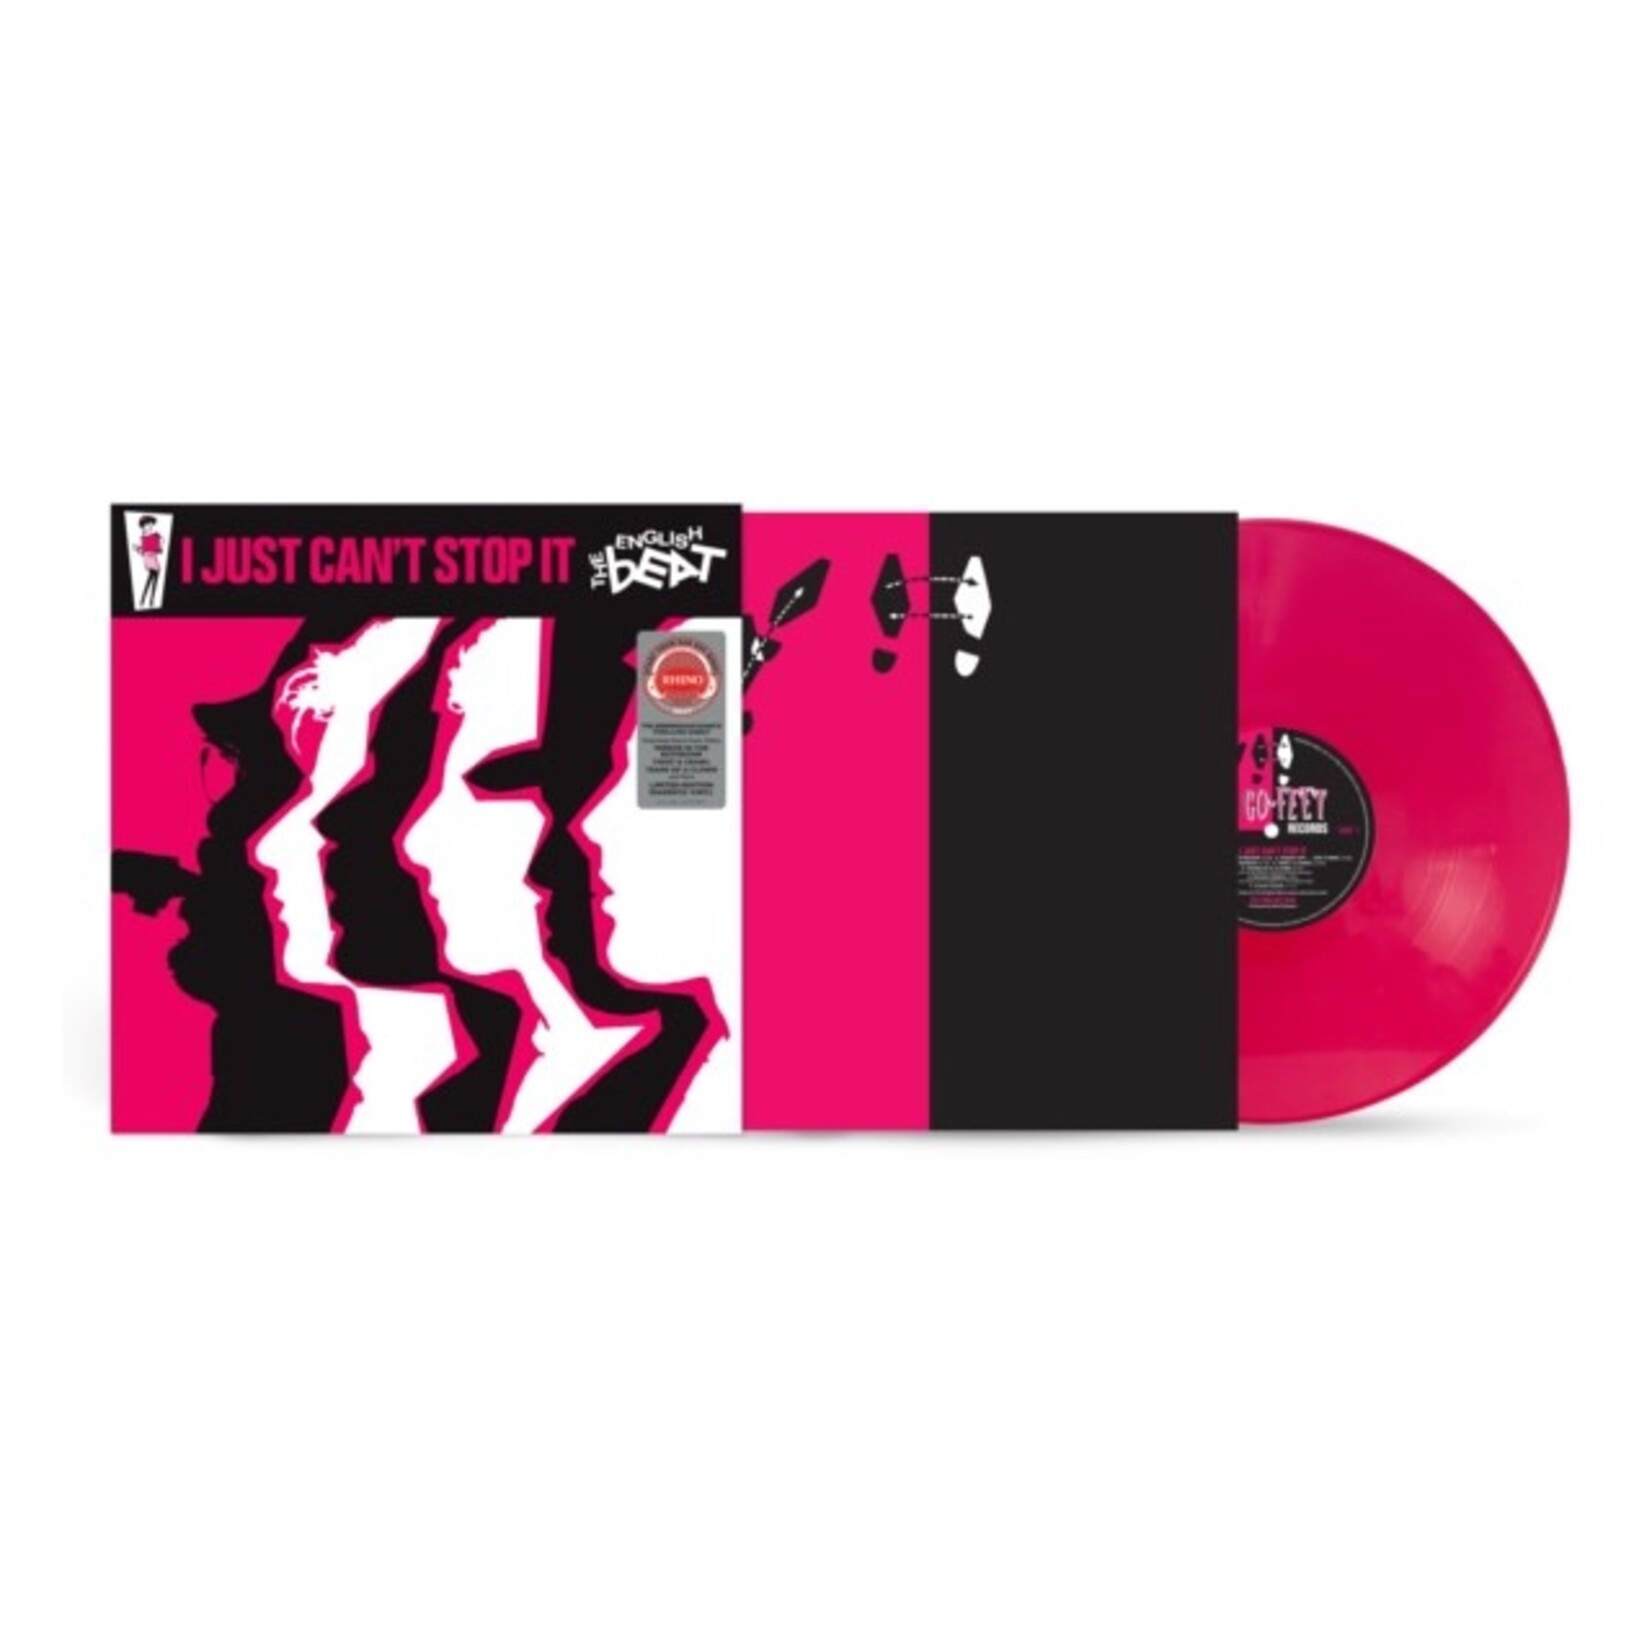 English Beat - I Just Can’t Stop It (Coloured Vinyl) [LP] (SYEOR24)